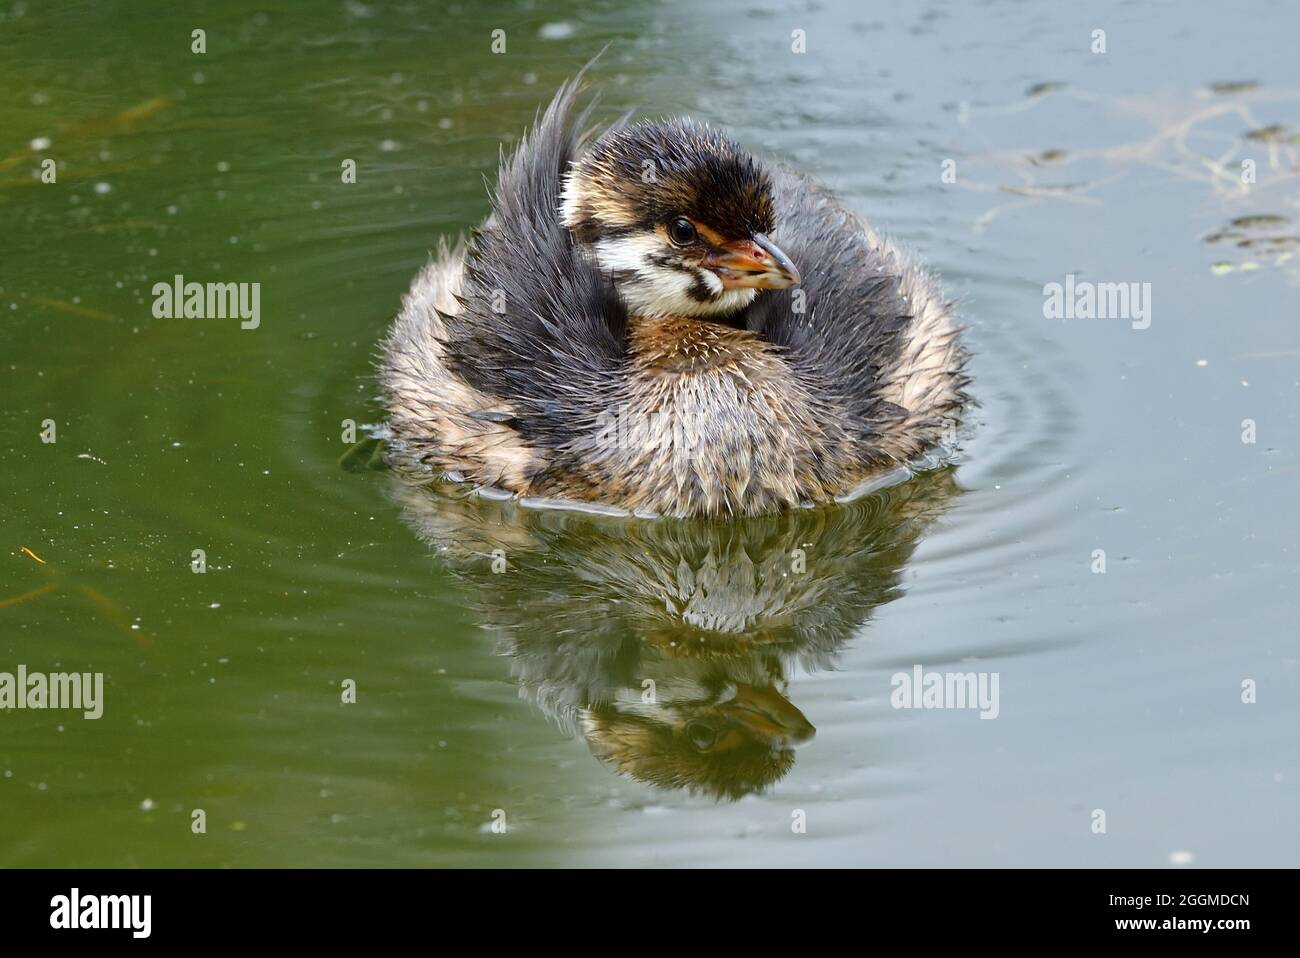 A pied-billed grebe chick  ' Podilymbus podiceps', floating on the still waters of a remote beaver pond in rural Alberta Canada. Stock Photo